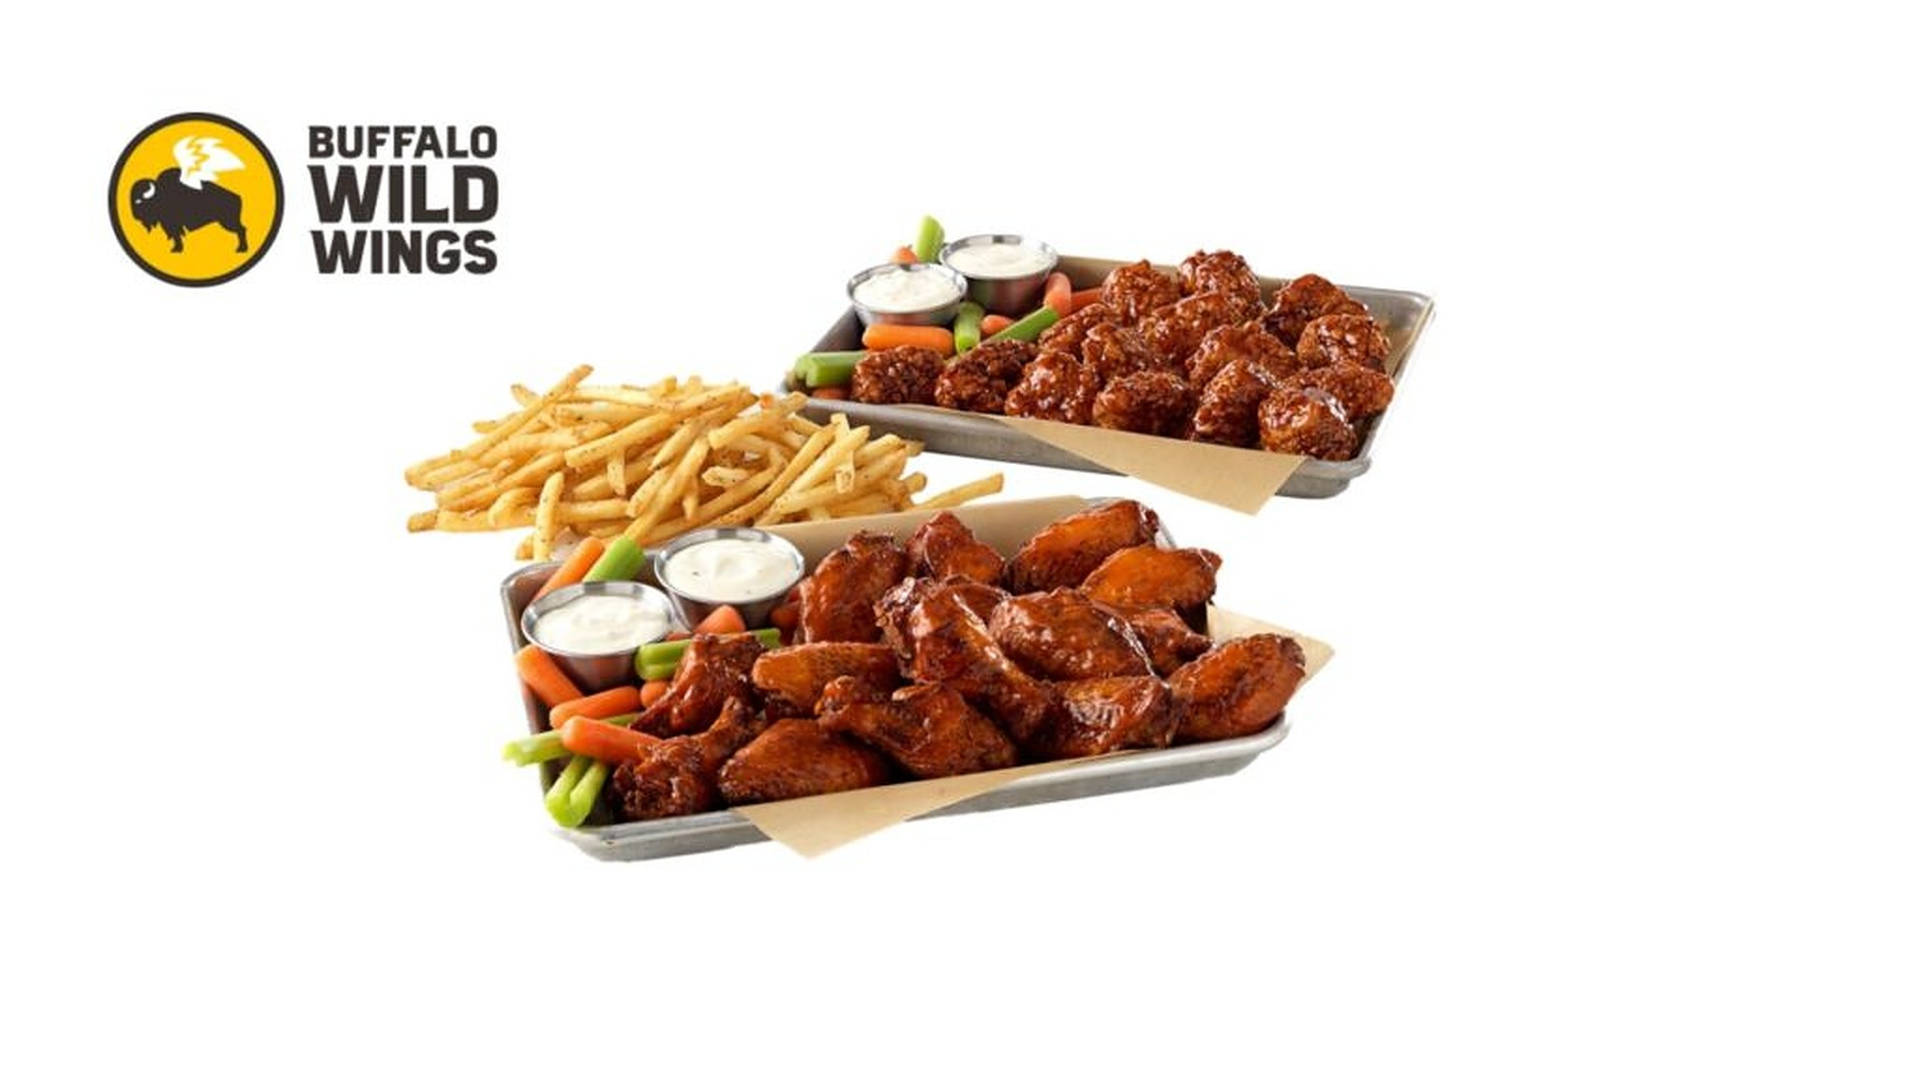 Buffalo Wild Wings Chicken And Fries Wallpaper